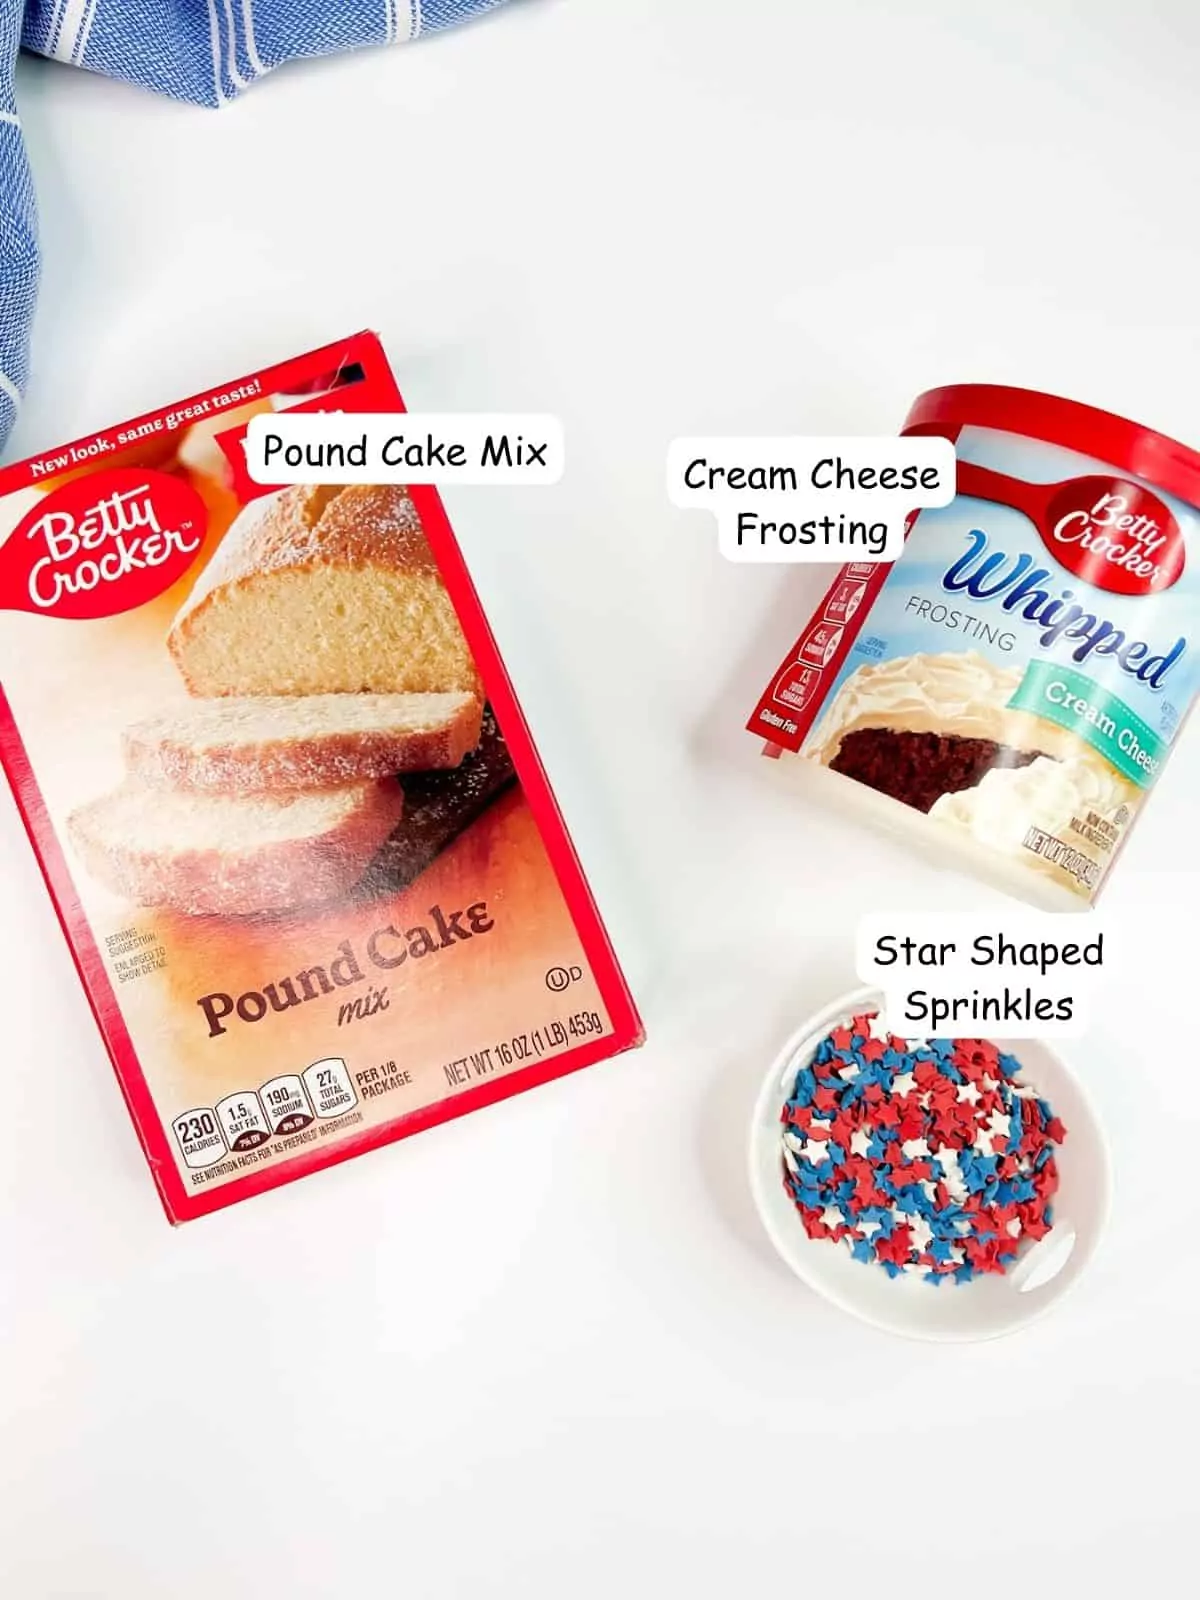 ingredients boxed cake mix, canned cream cheese frosting and star shaped sprinkles.